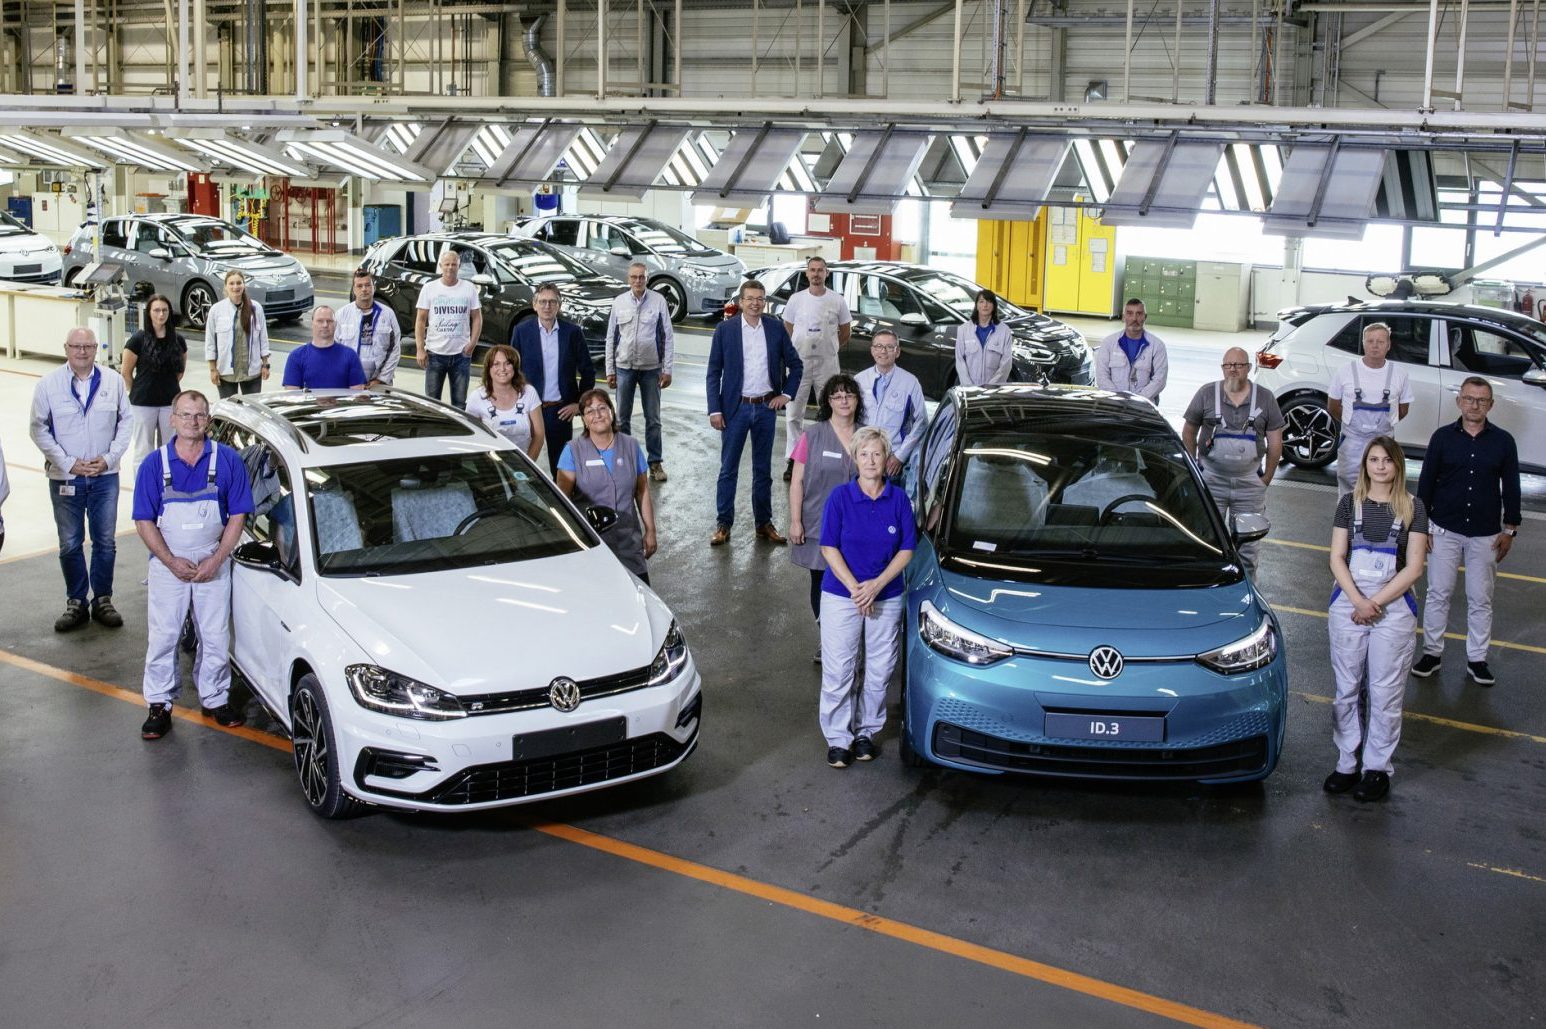 The Volkswagen factory in Zwickau, Germany, which exclusively produces fully electric vehicles.